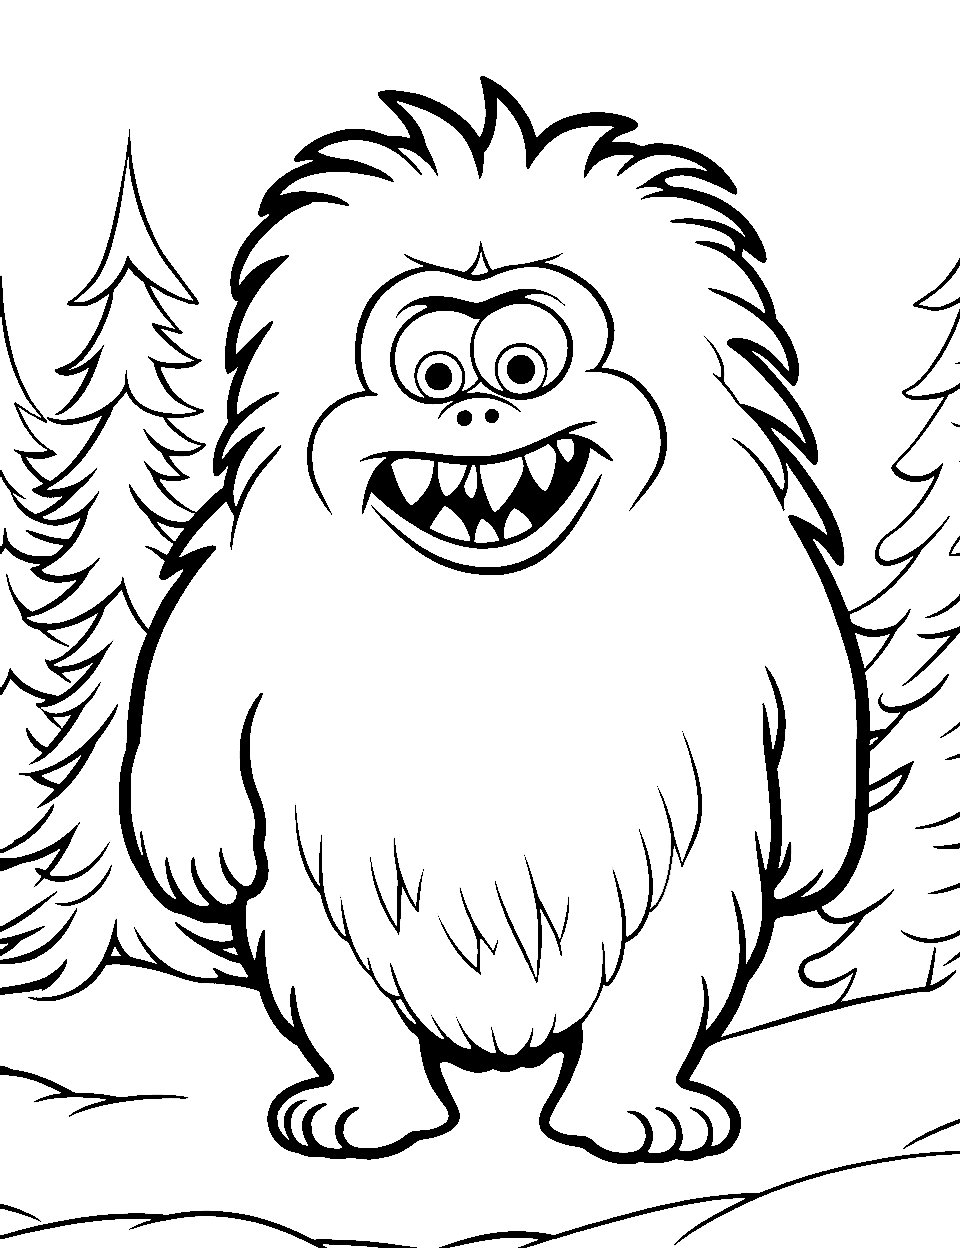 Winter Yeti in a Snowy Forest Monster Coloring Page - A fluffy yeti wandering through a snowy forest landscape.